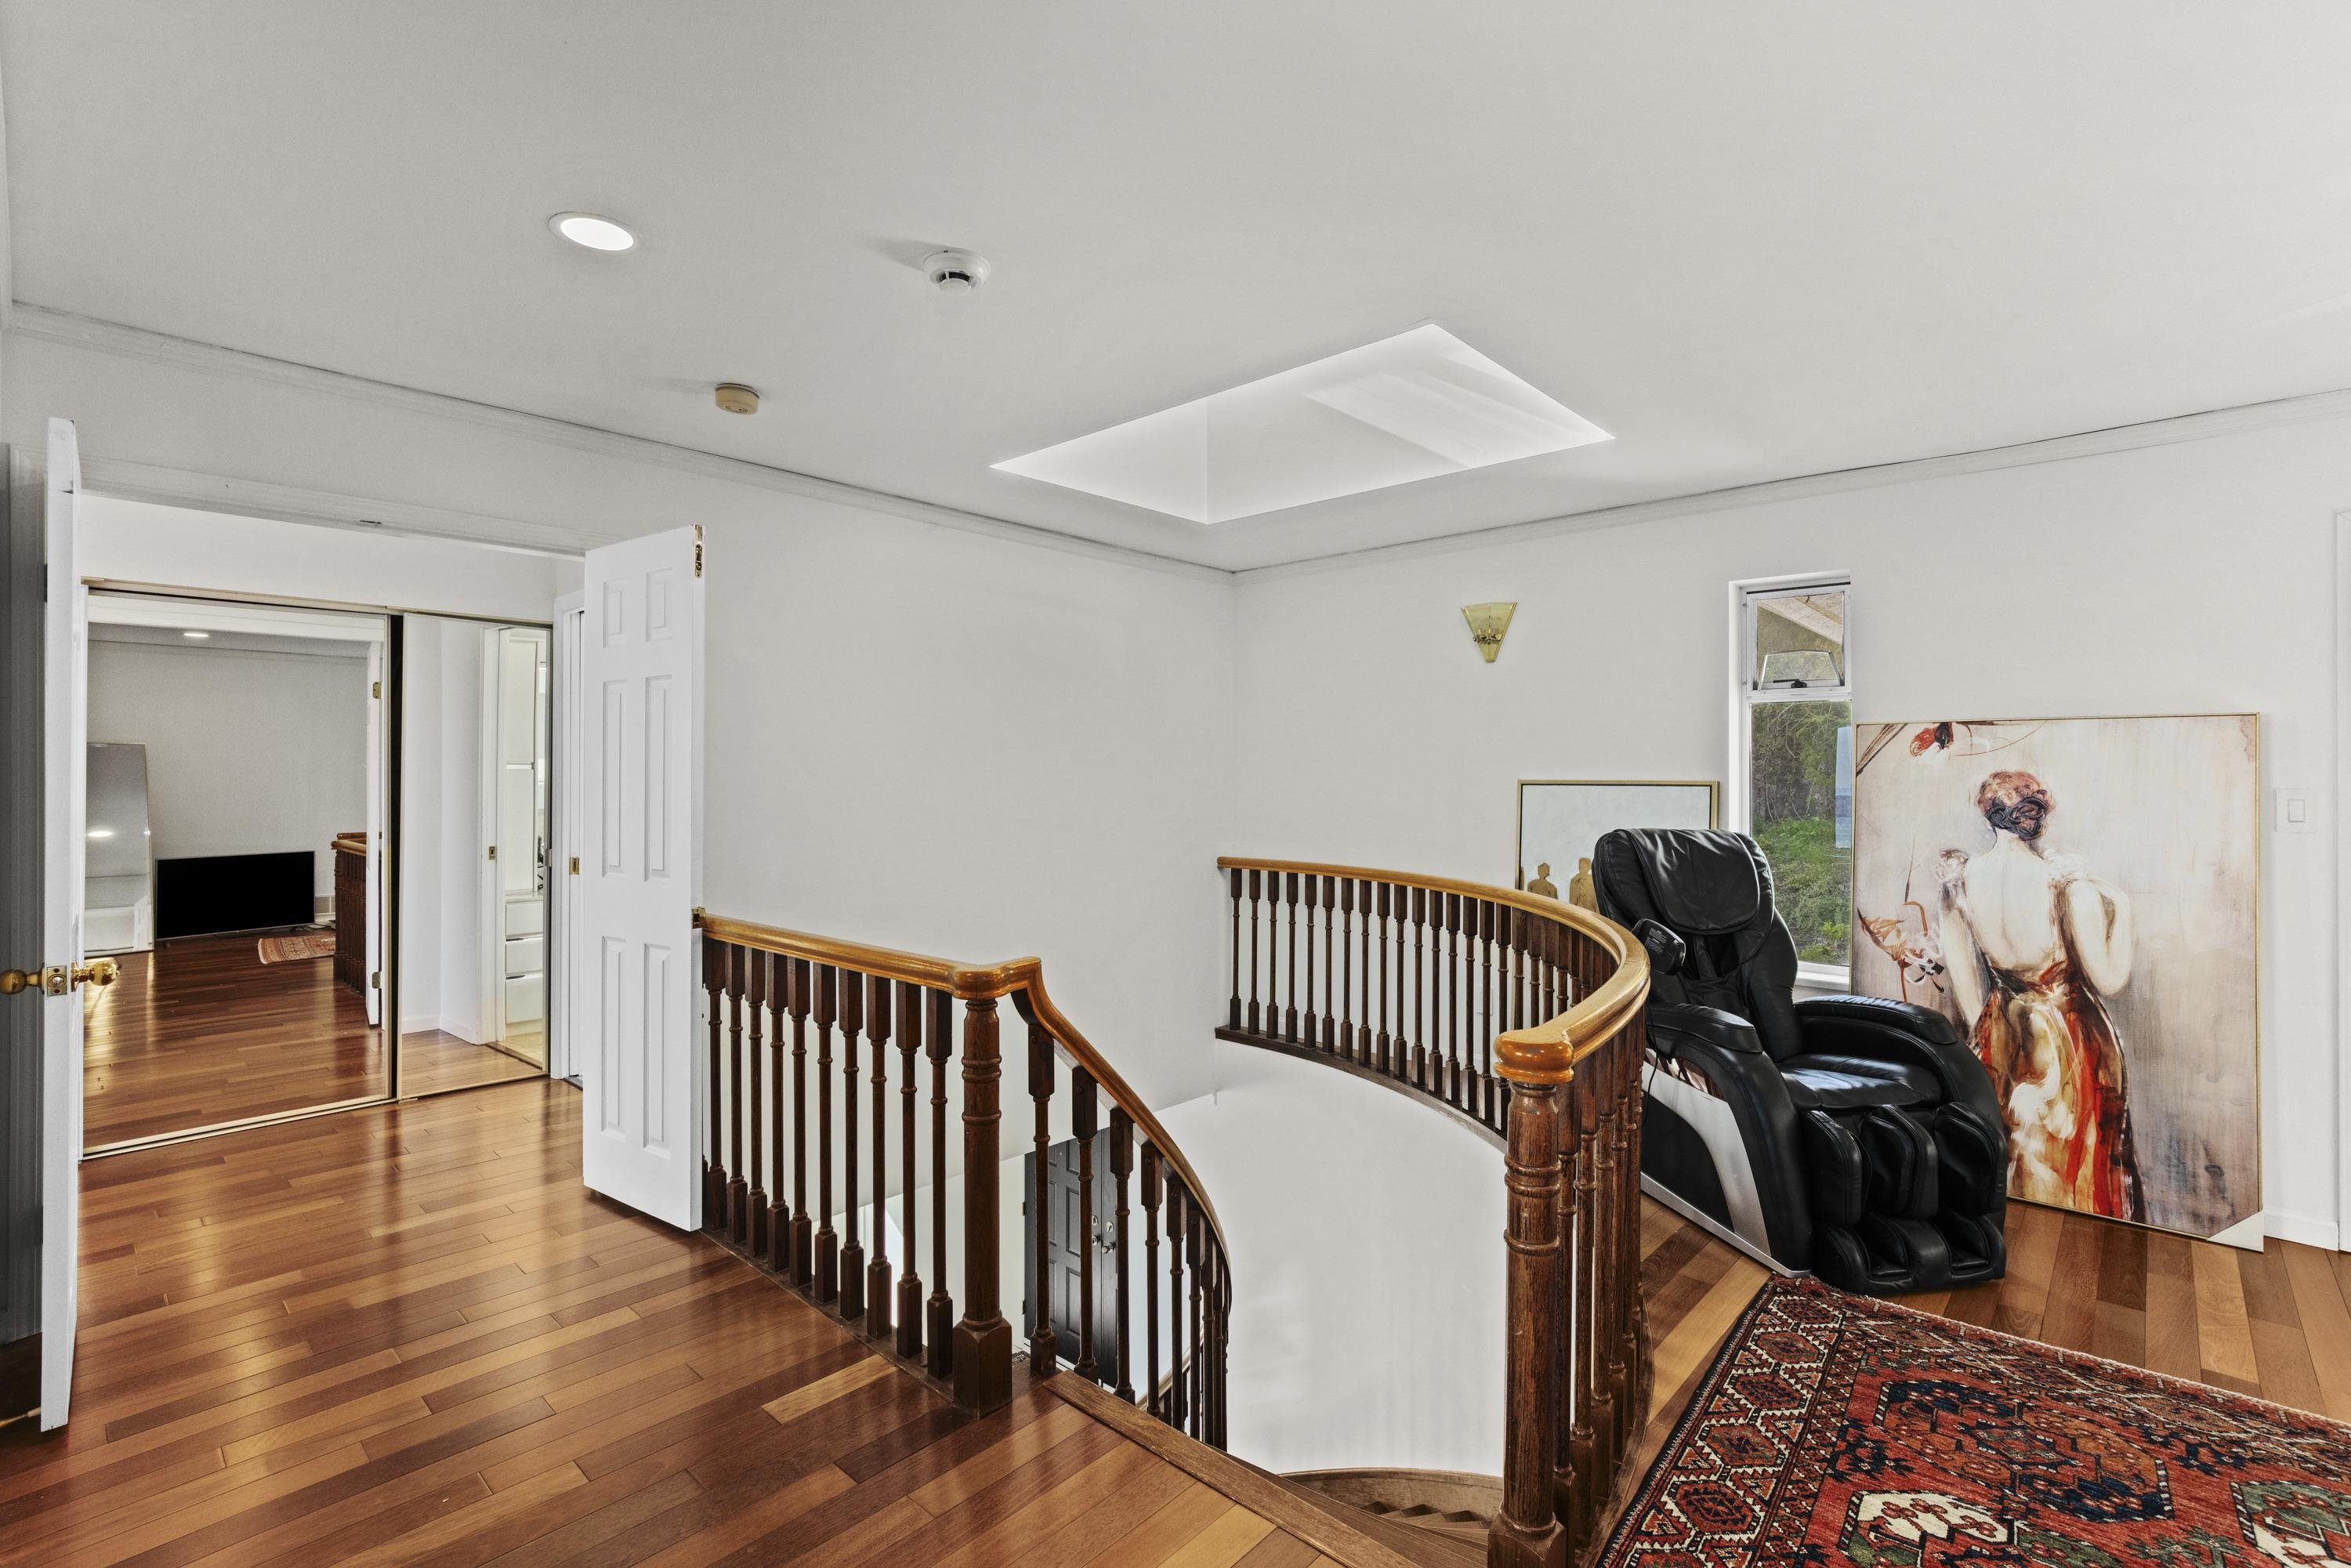 Listing image of 2206 WESTHILL DRIVE